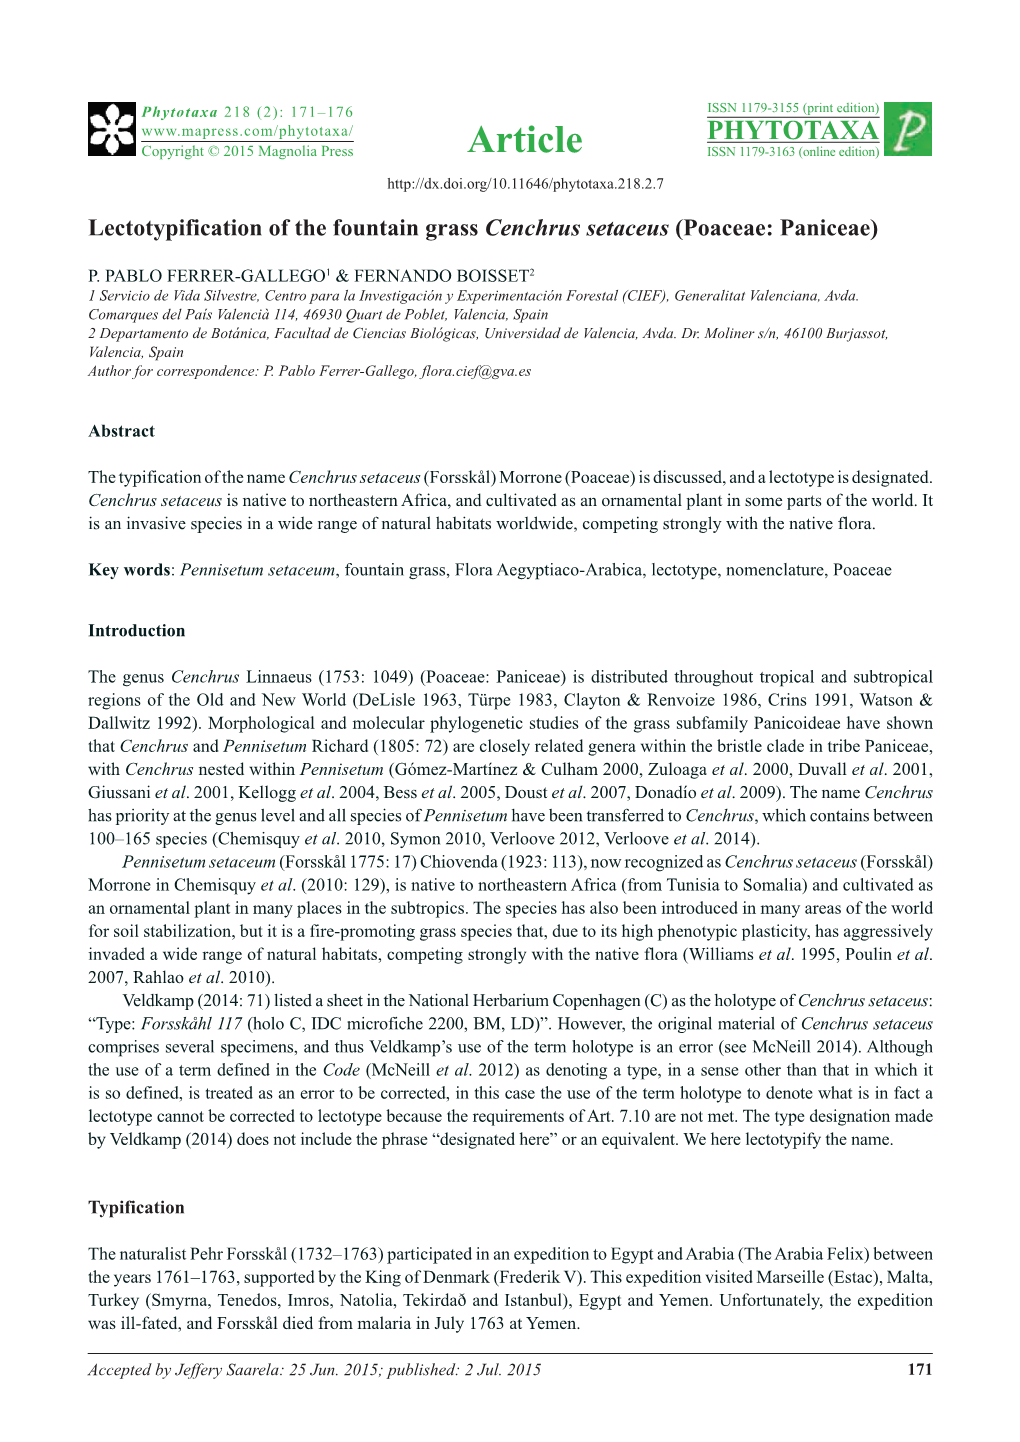 Lectotypification of the Fountain Grass Cenchrus Setaceus (Poaceae: Paniceae)